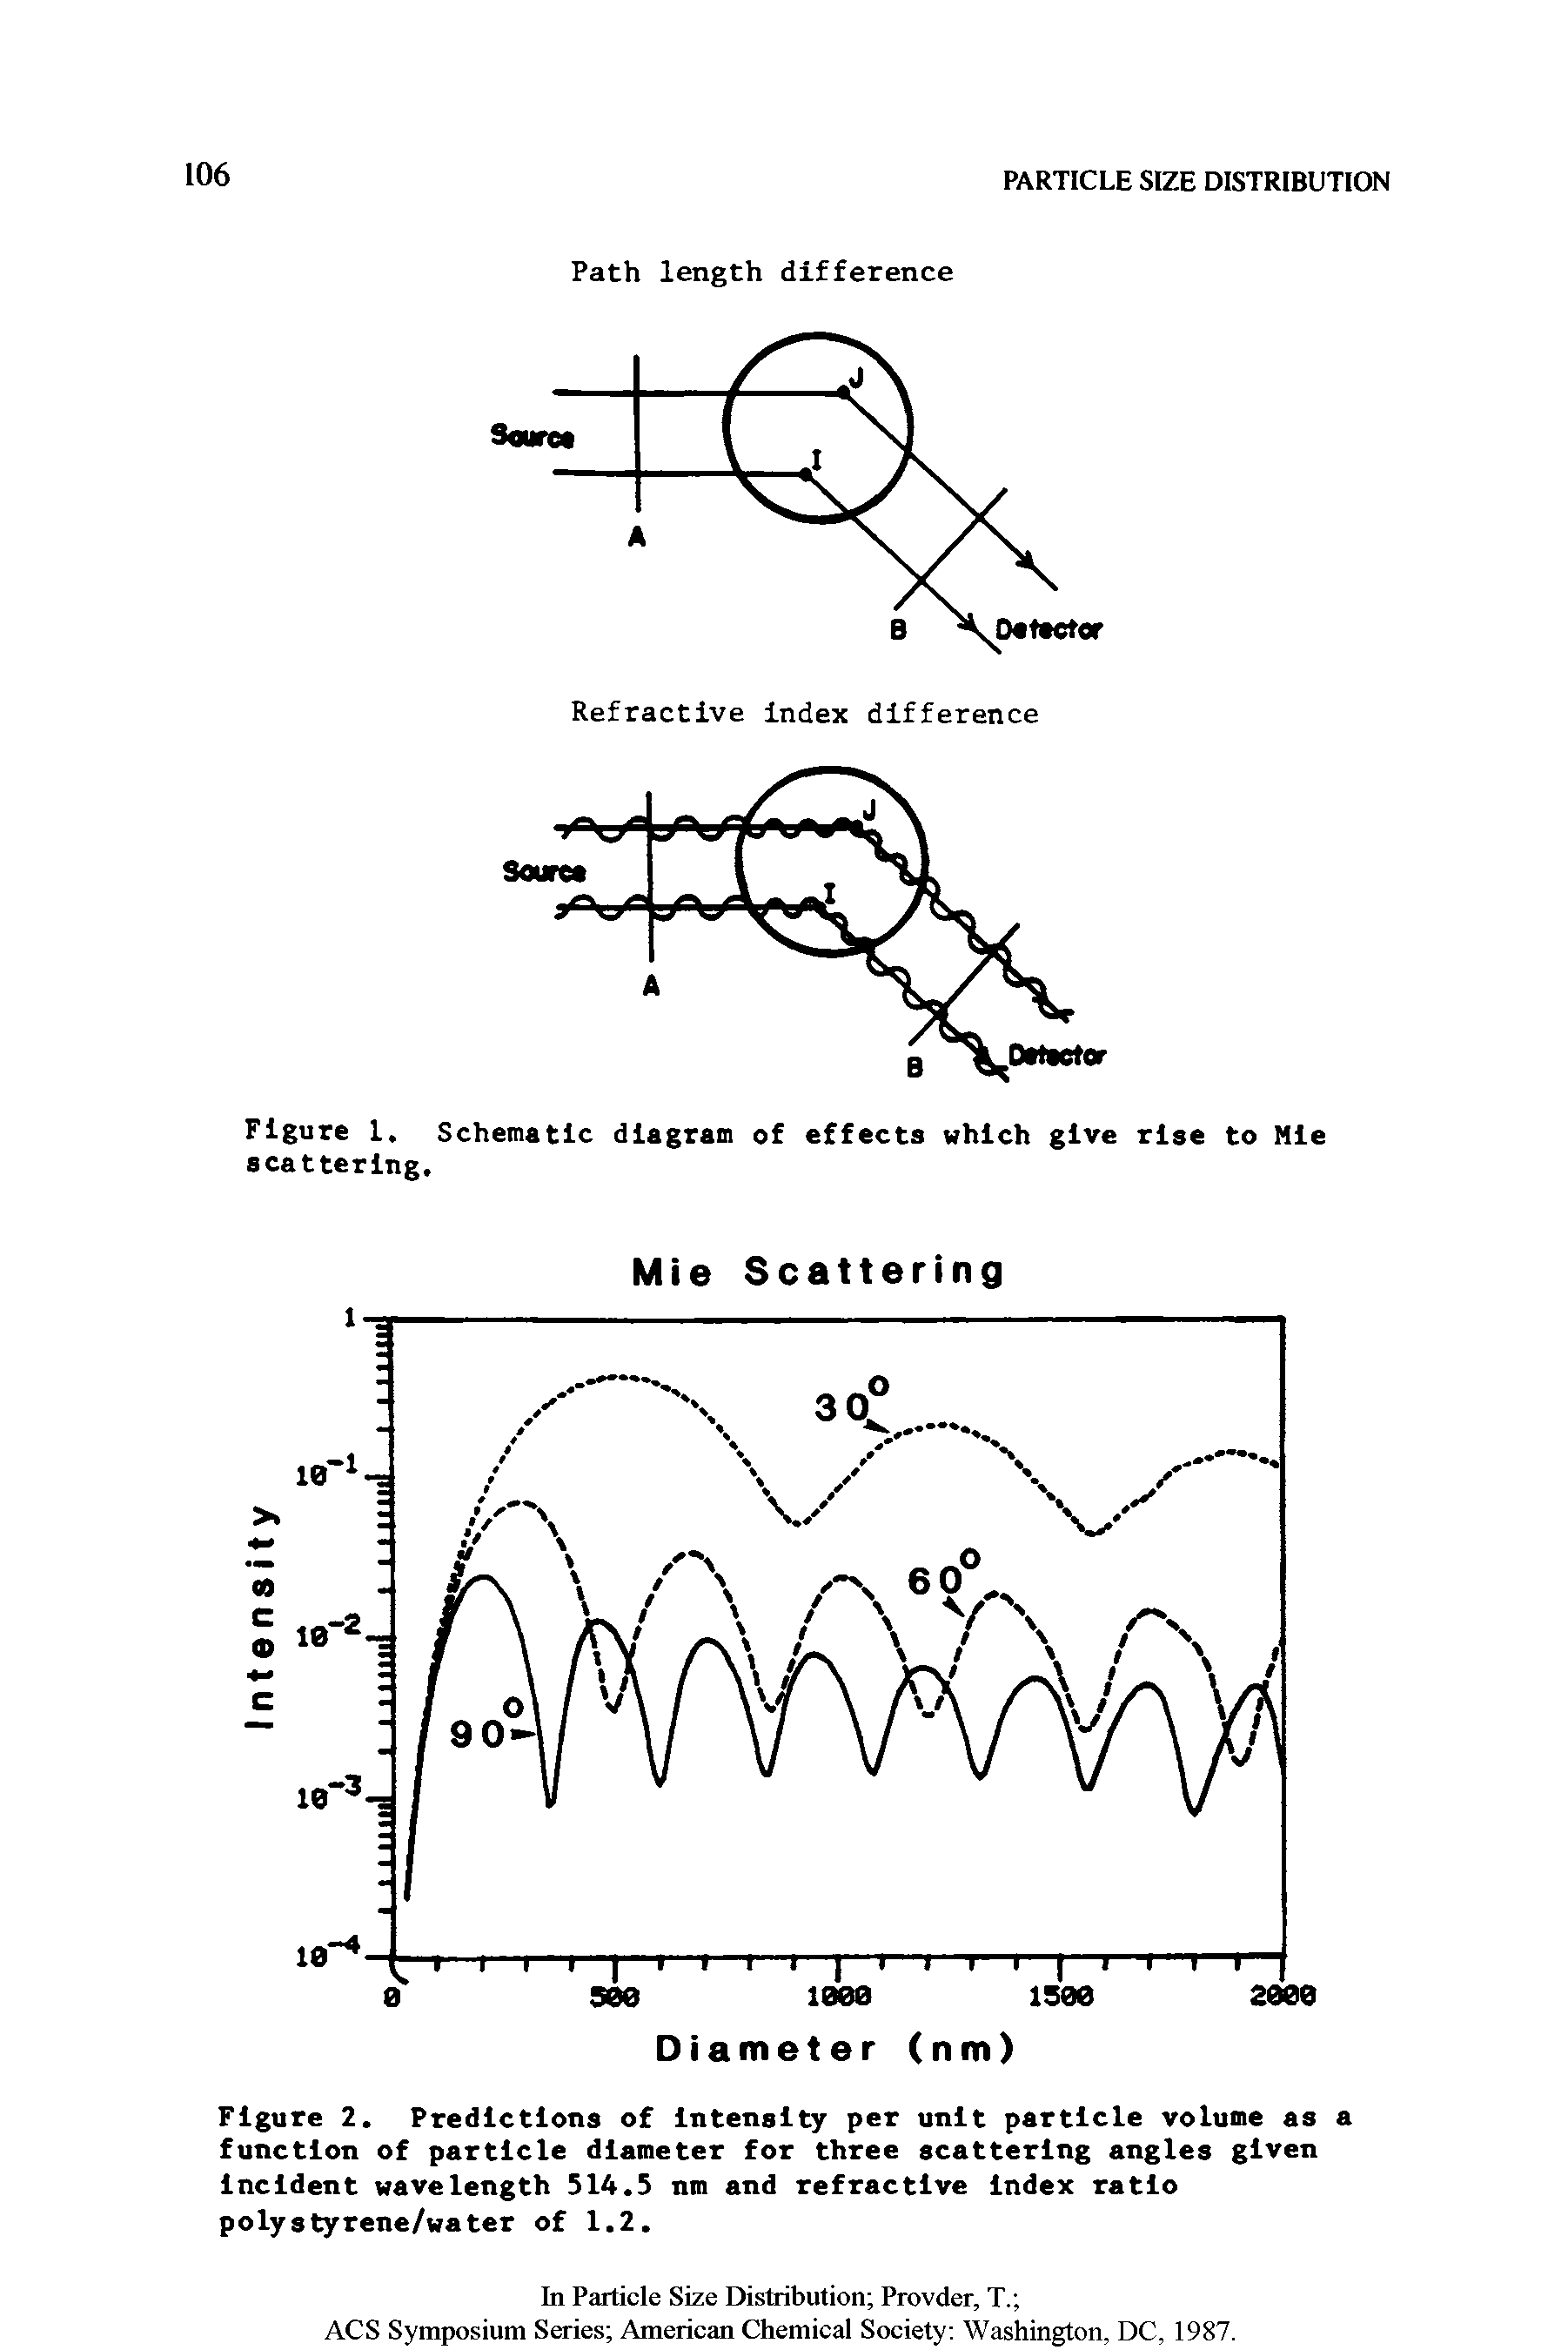 Figure 2. Predictions of intensity per unit particle volume as a function of particle diameter for three scattering angles given Incident wavelength 514.5 nm and refractive index ratio polystyrene/water of 1.2.